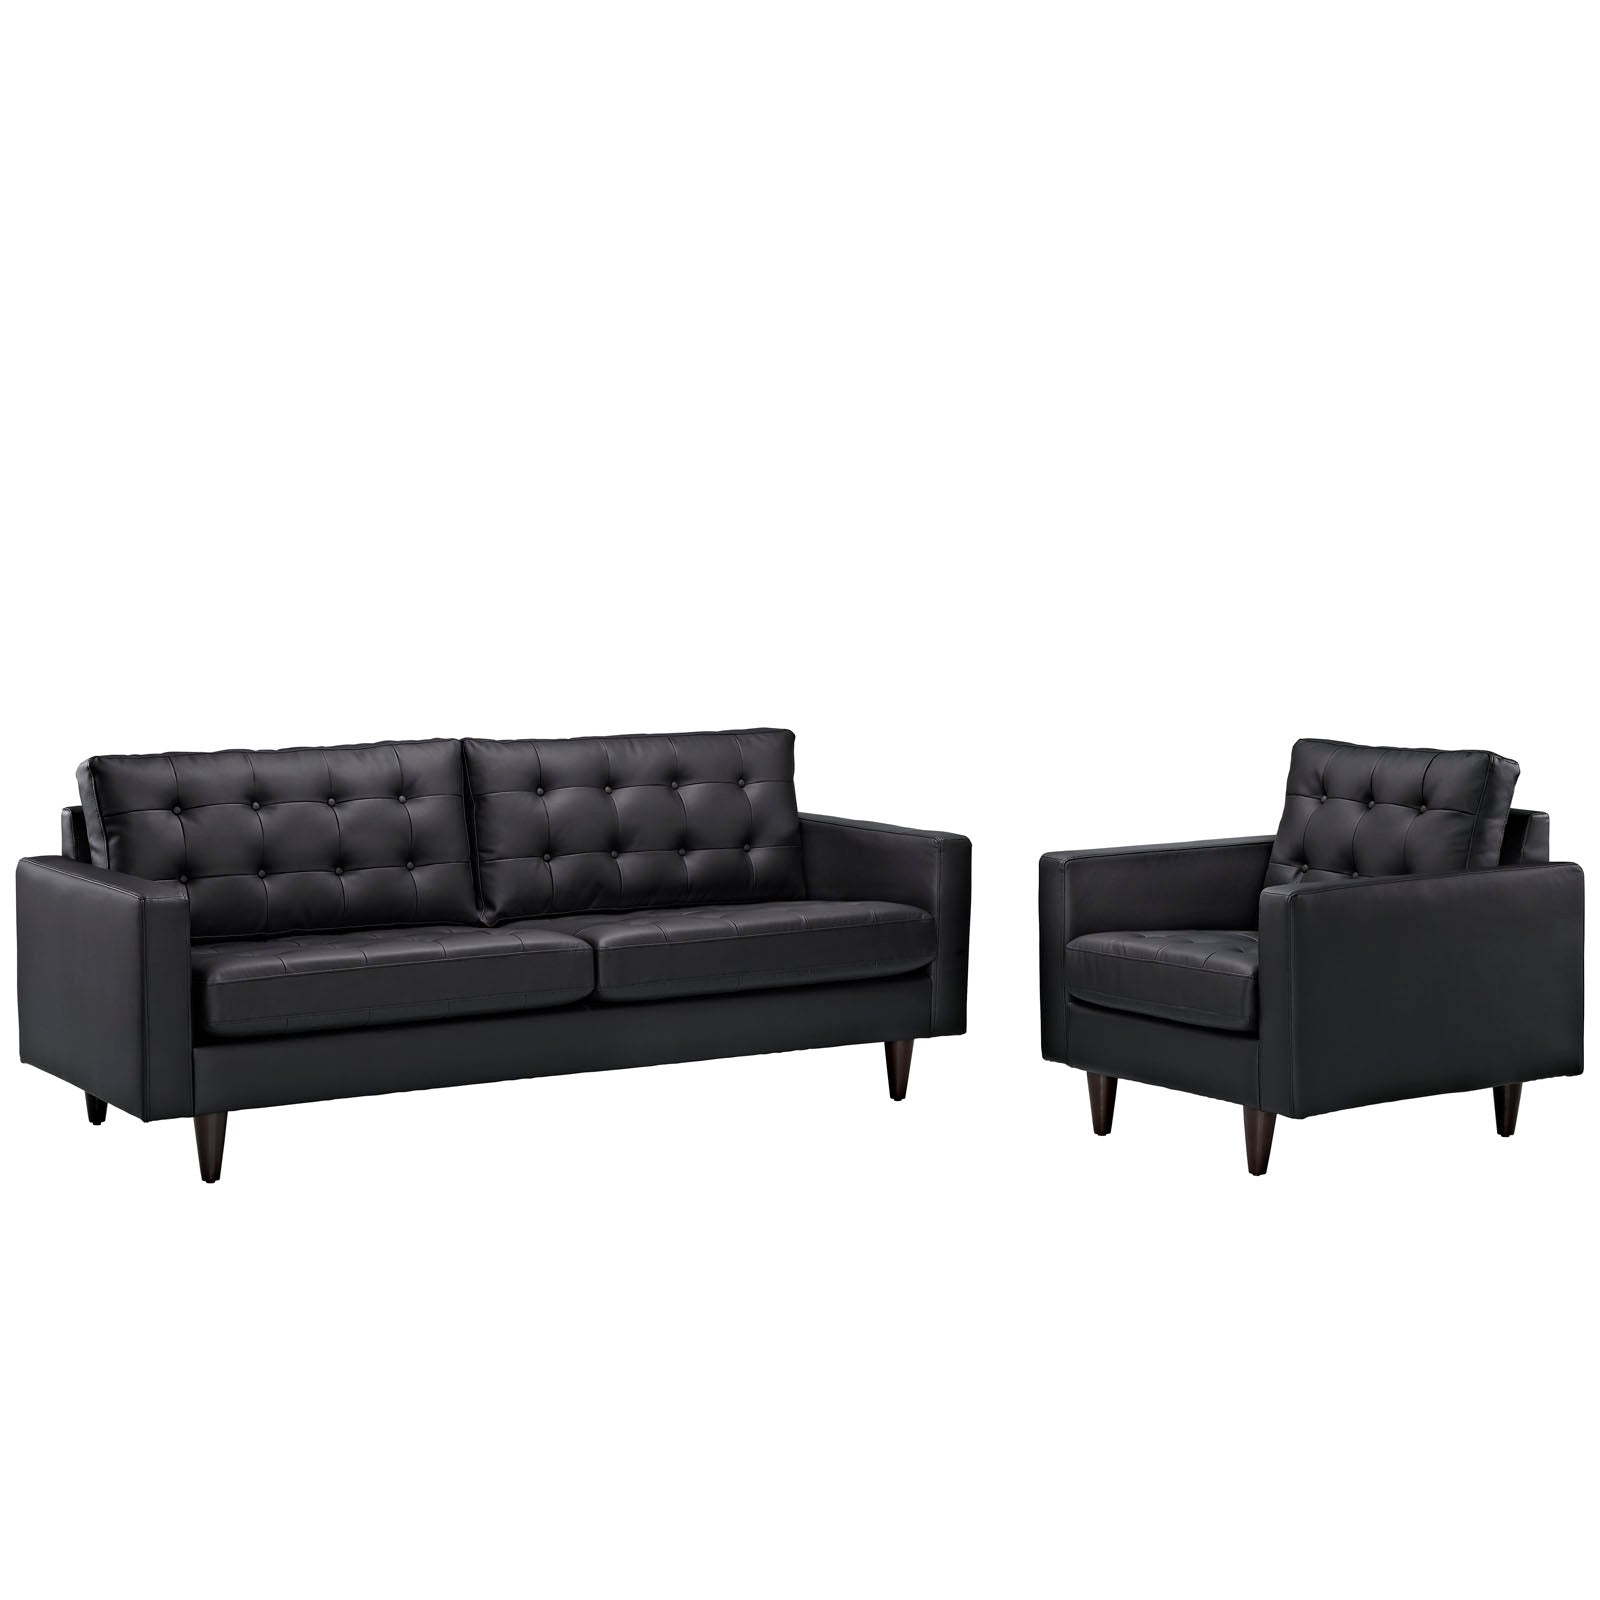 Empress Sofa and Armchair Set of 2 - East Shore Modern Home Furnishings